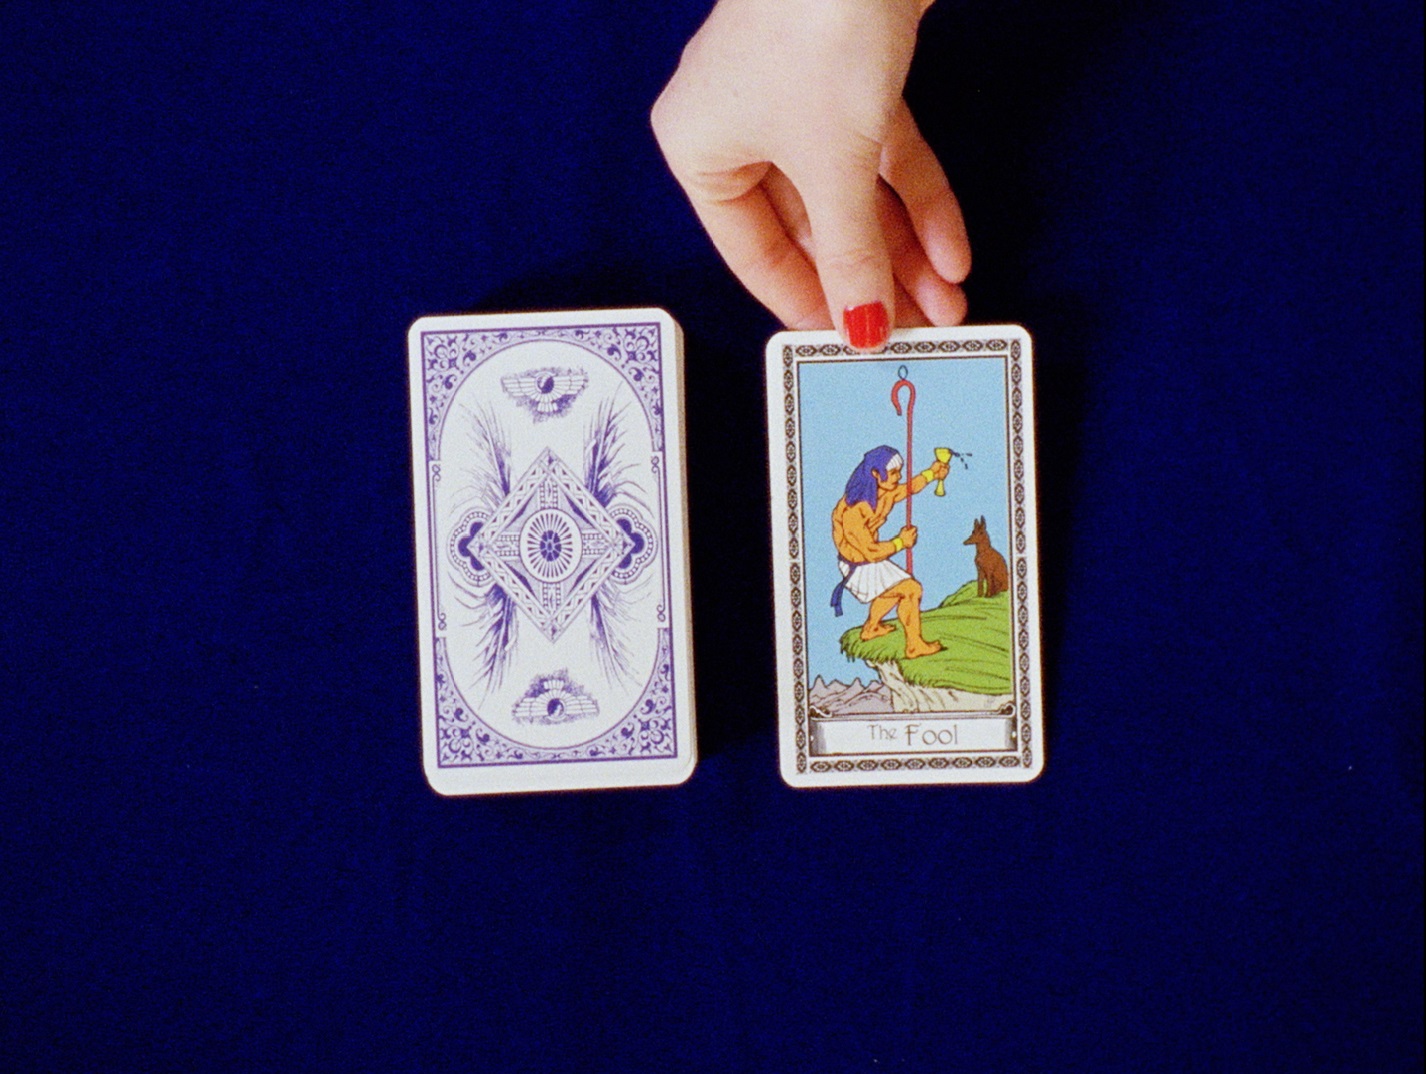 Film still showing two stacks of cards and a hand flipping one card over to face upwards